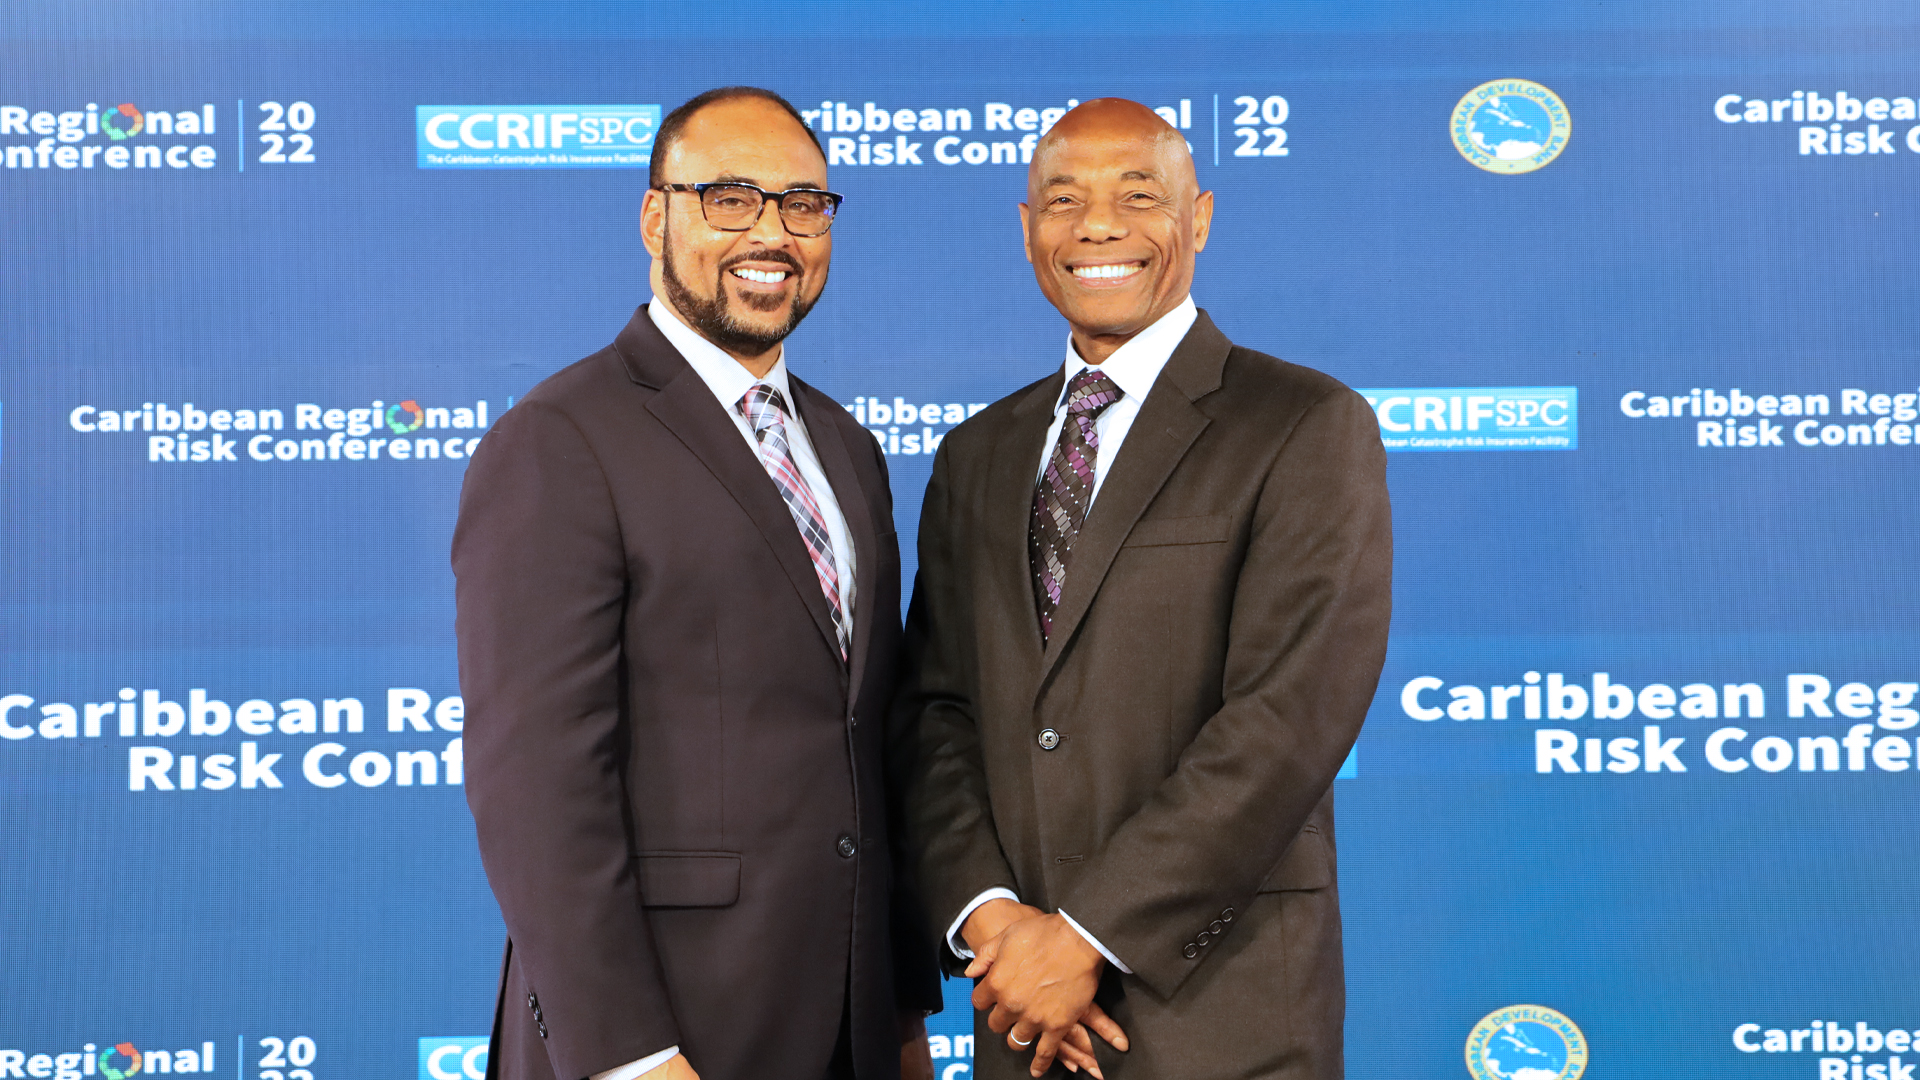 CDB President and CCRIF SPC CEO in dark suits with step and repeat backdrop behind him featuring conference logo